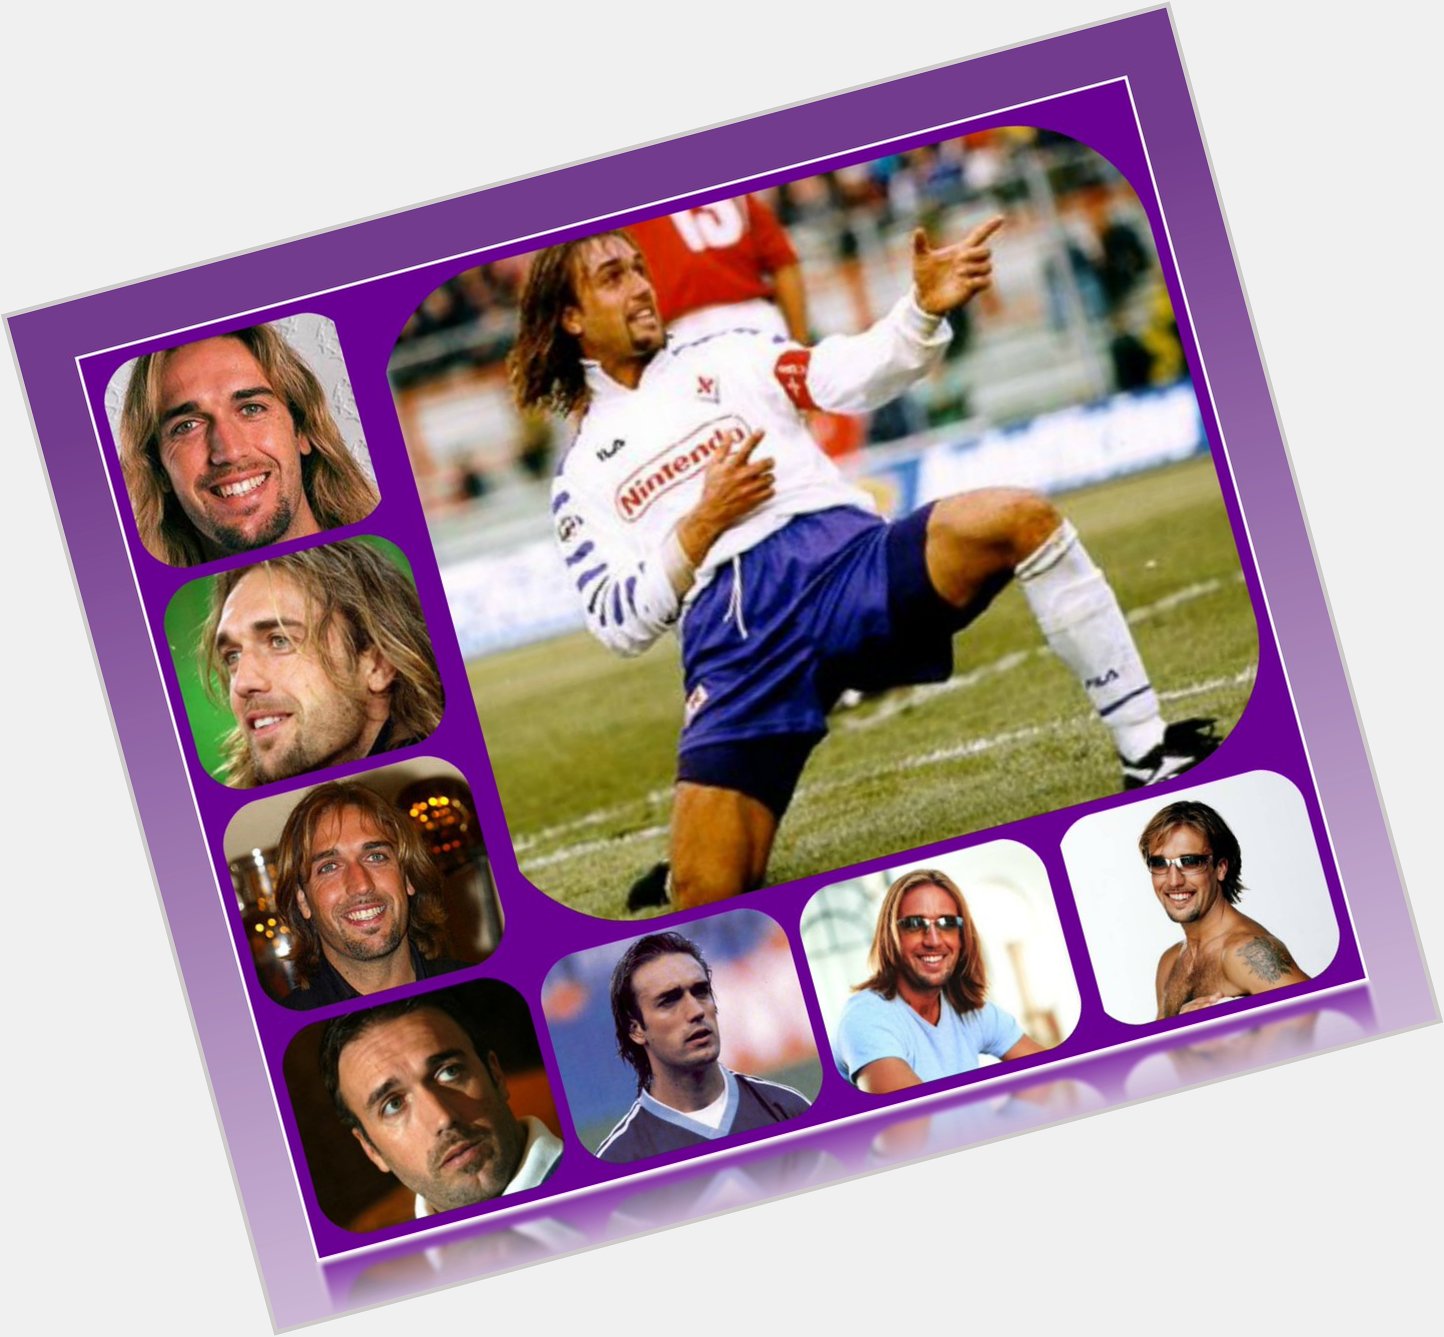 Didn\t have time for this yesterday, but today i MUST do this.

Happy birthday, Gabriel Batistuta!      